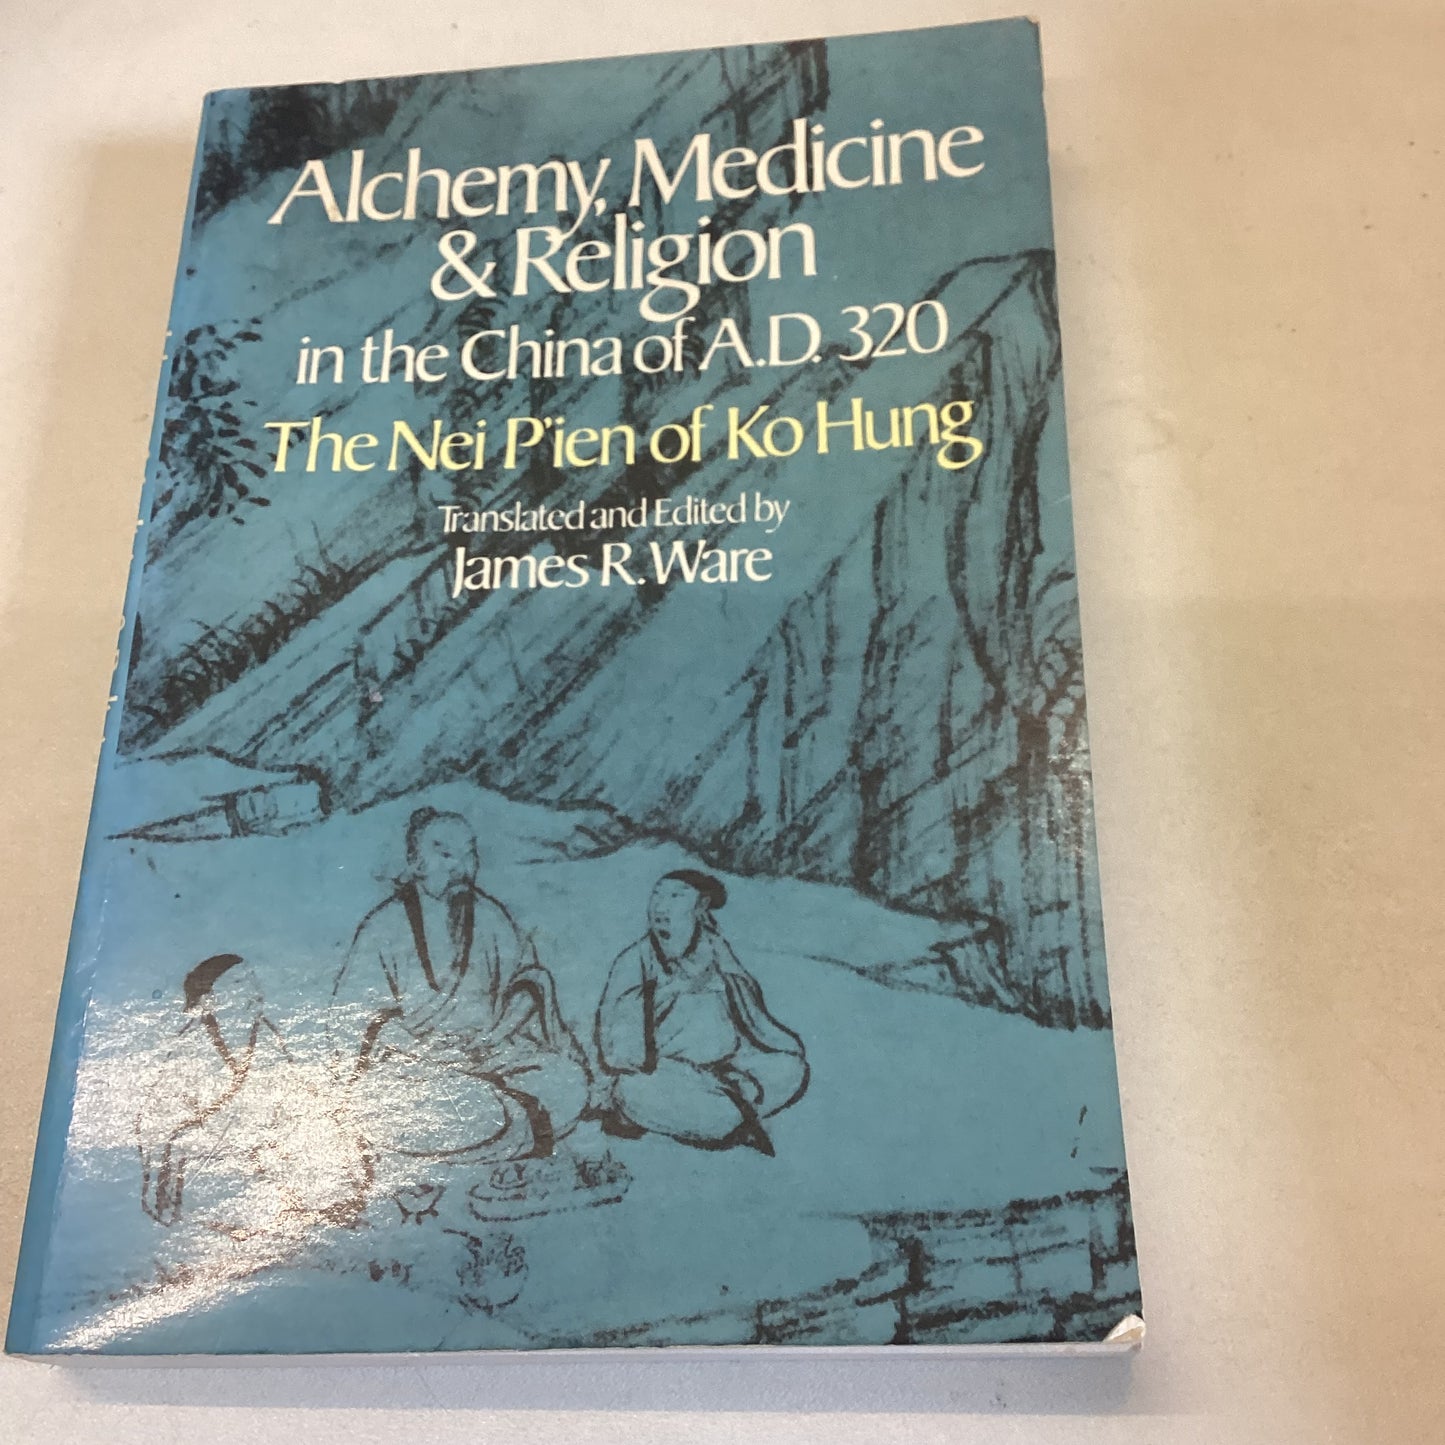 Alchemy, Medicine & Religion in The China of A.D. 320 The Nei P'ien of Ko Hung Translated and Edited by James R Ware